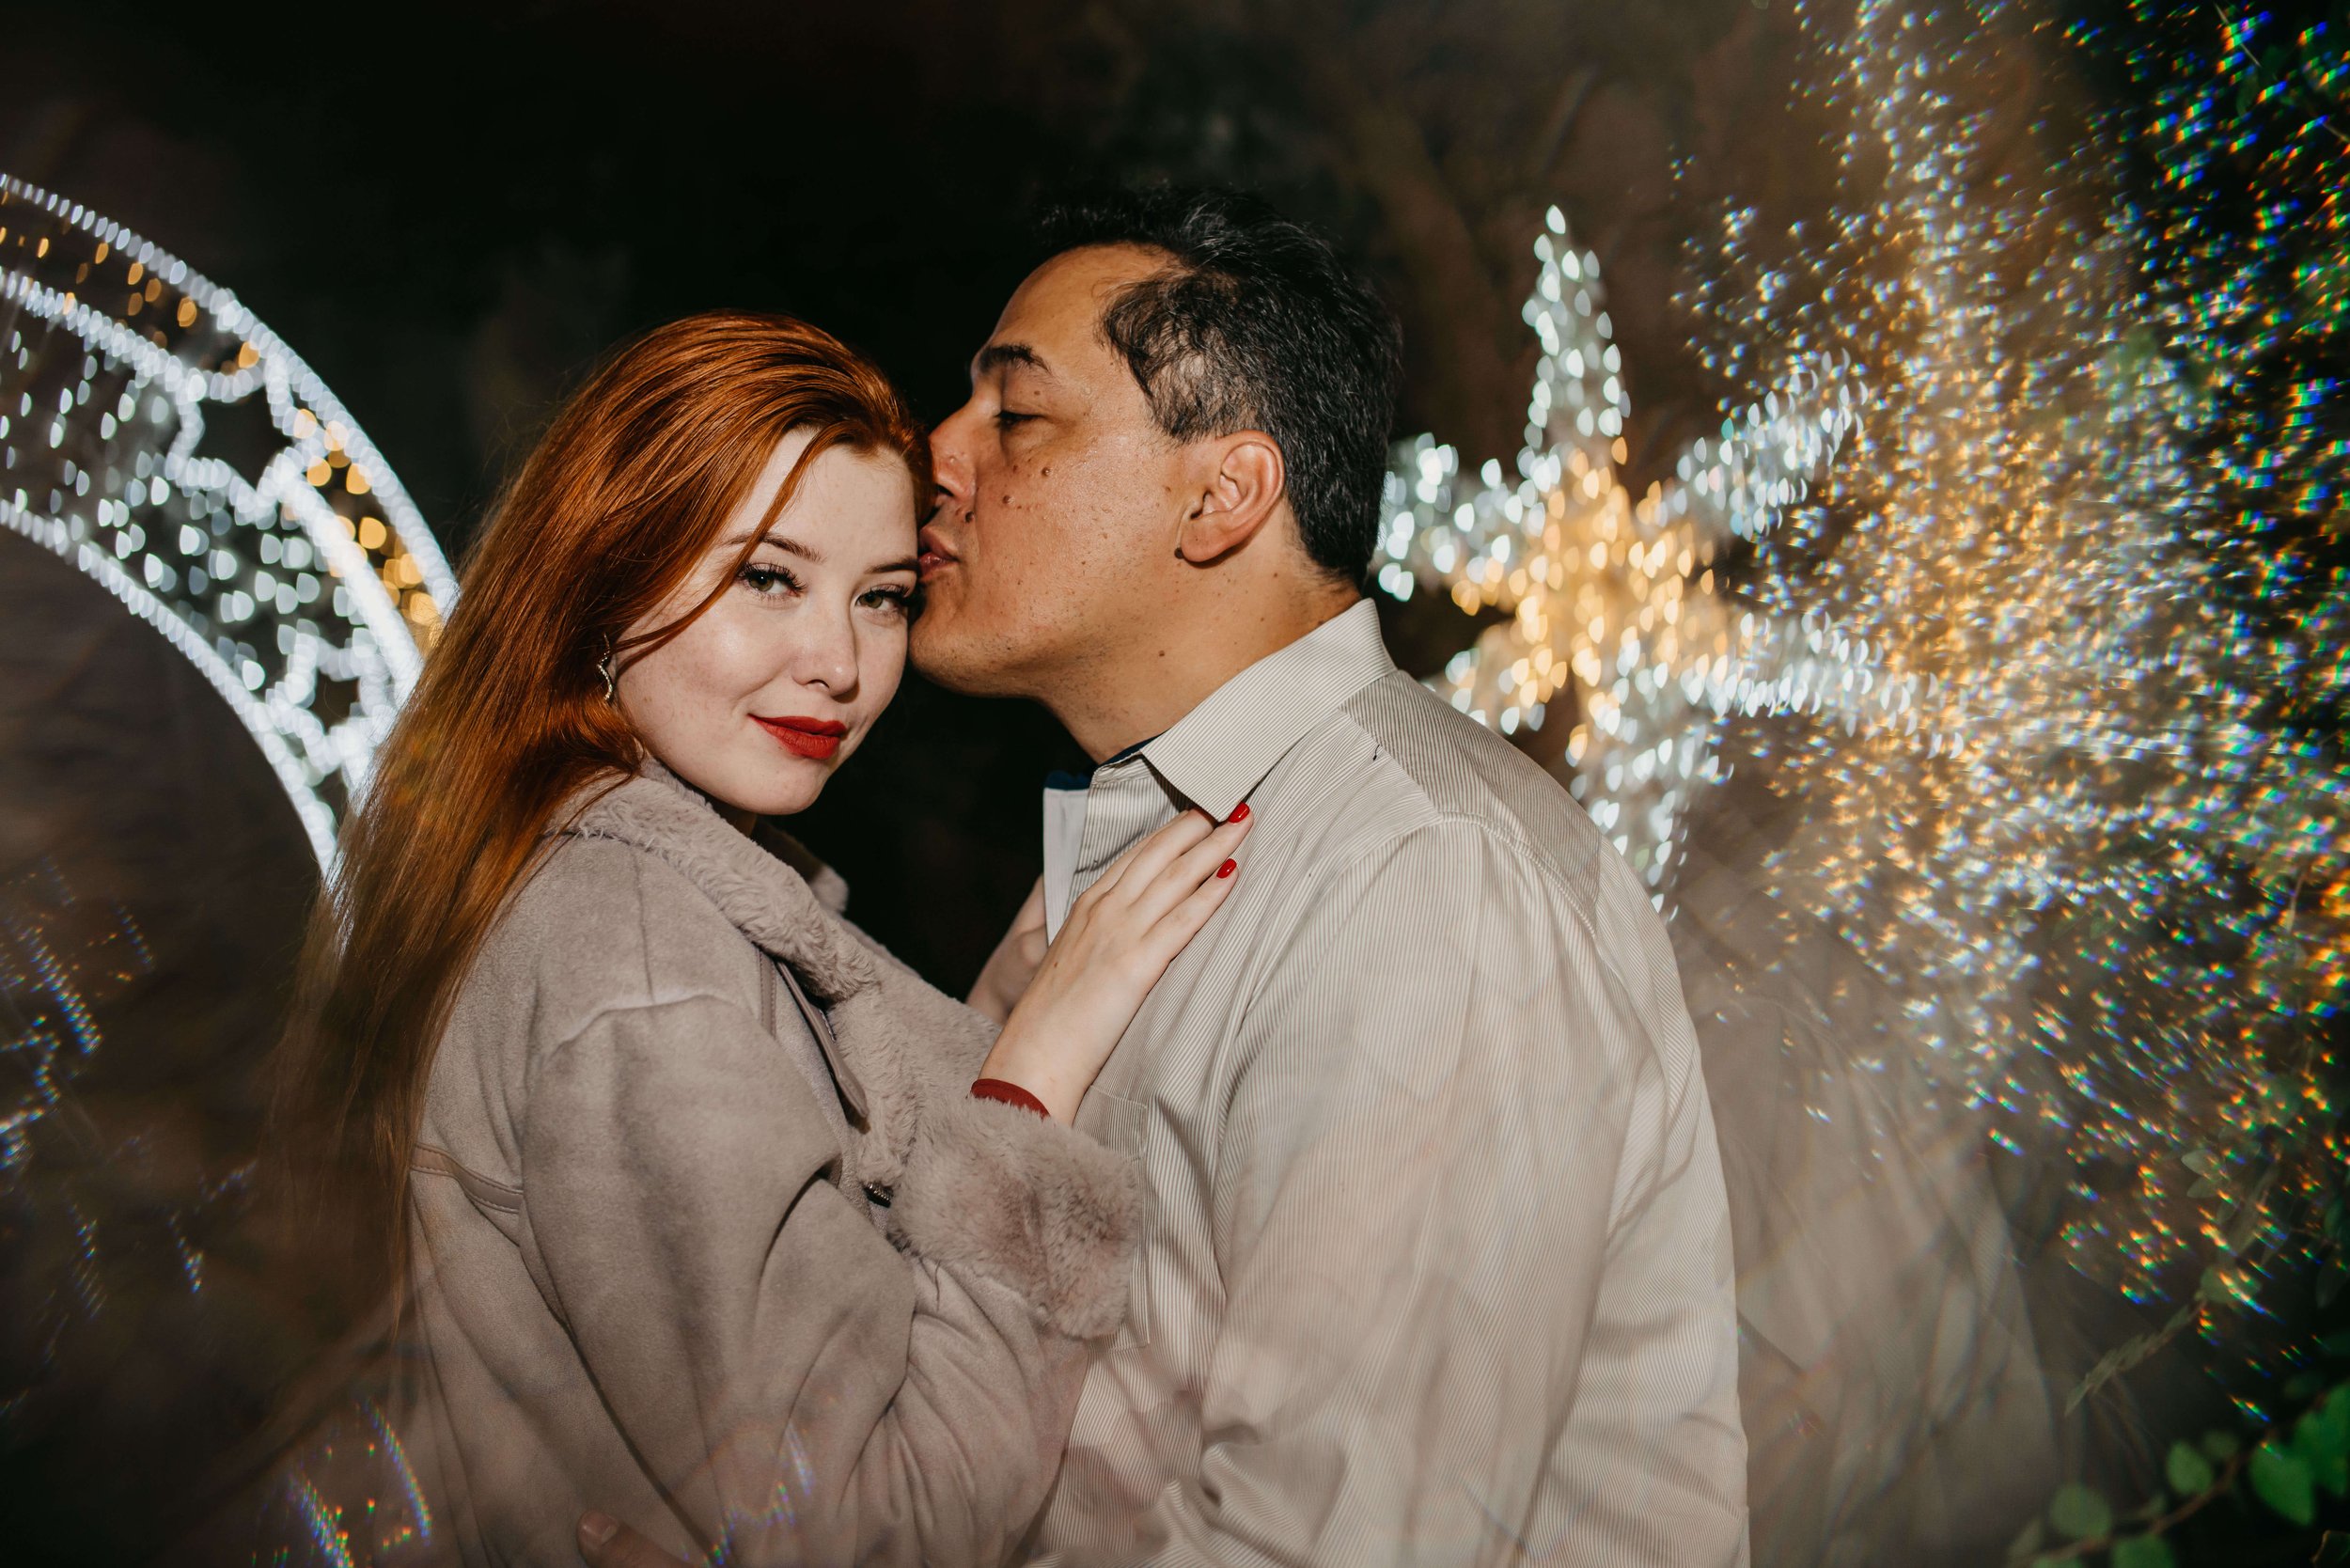 Just engaged surprise proposal photos by Houston Elopement Photographer J. Andrade Visual Arts